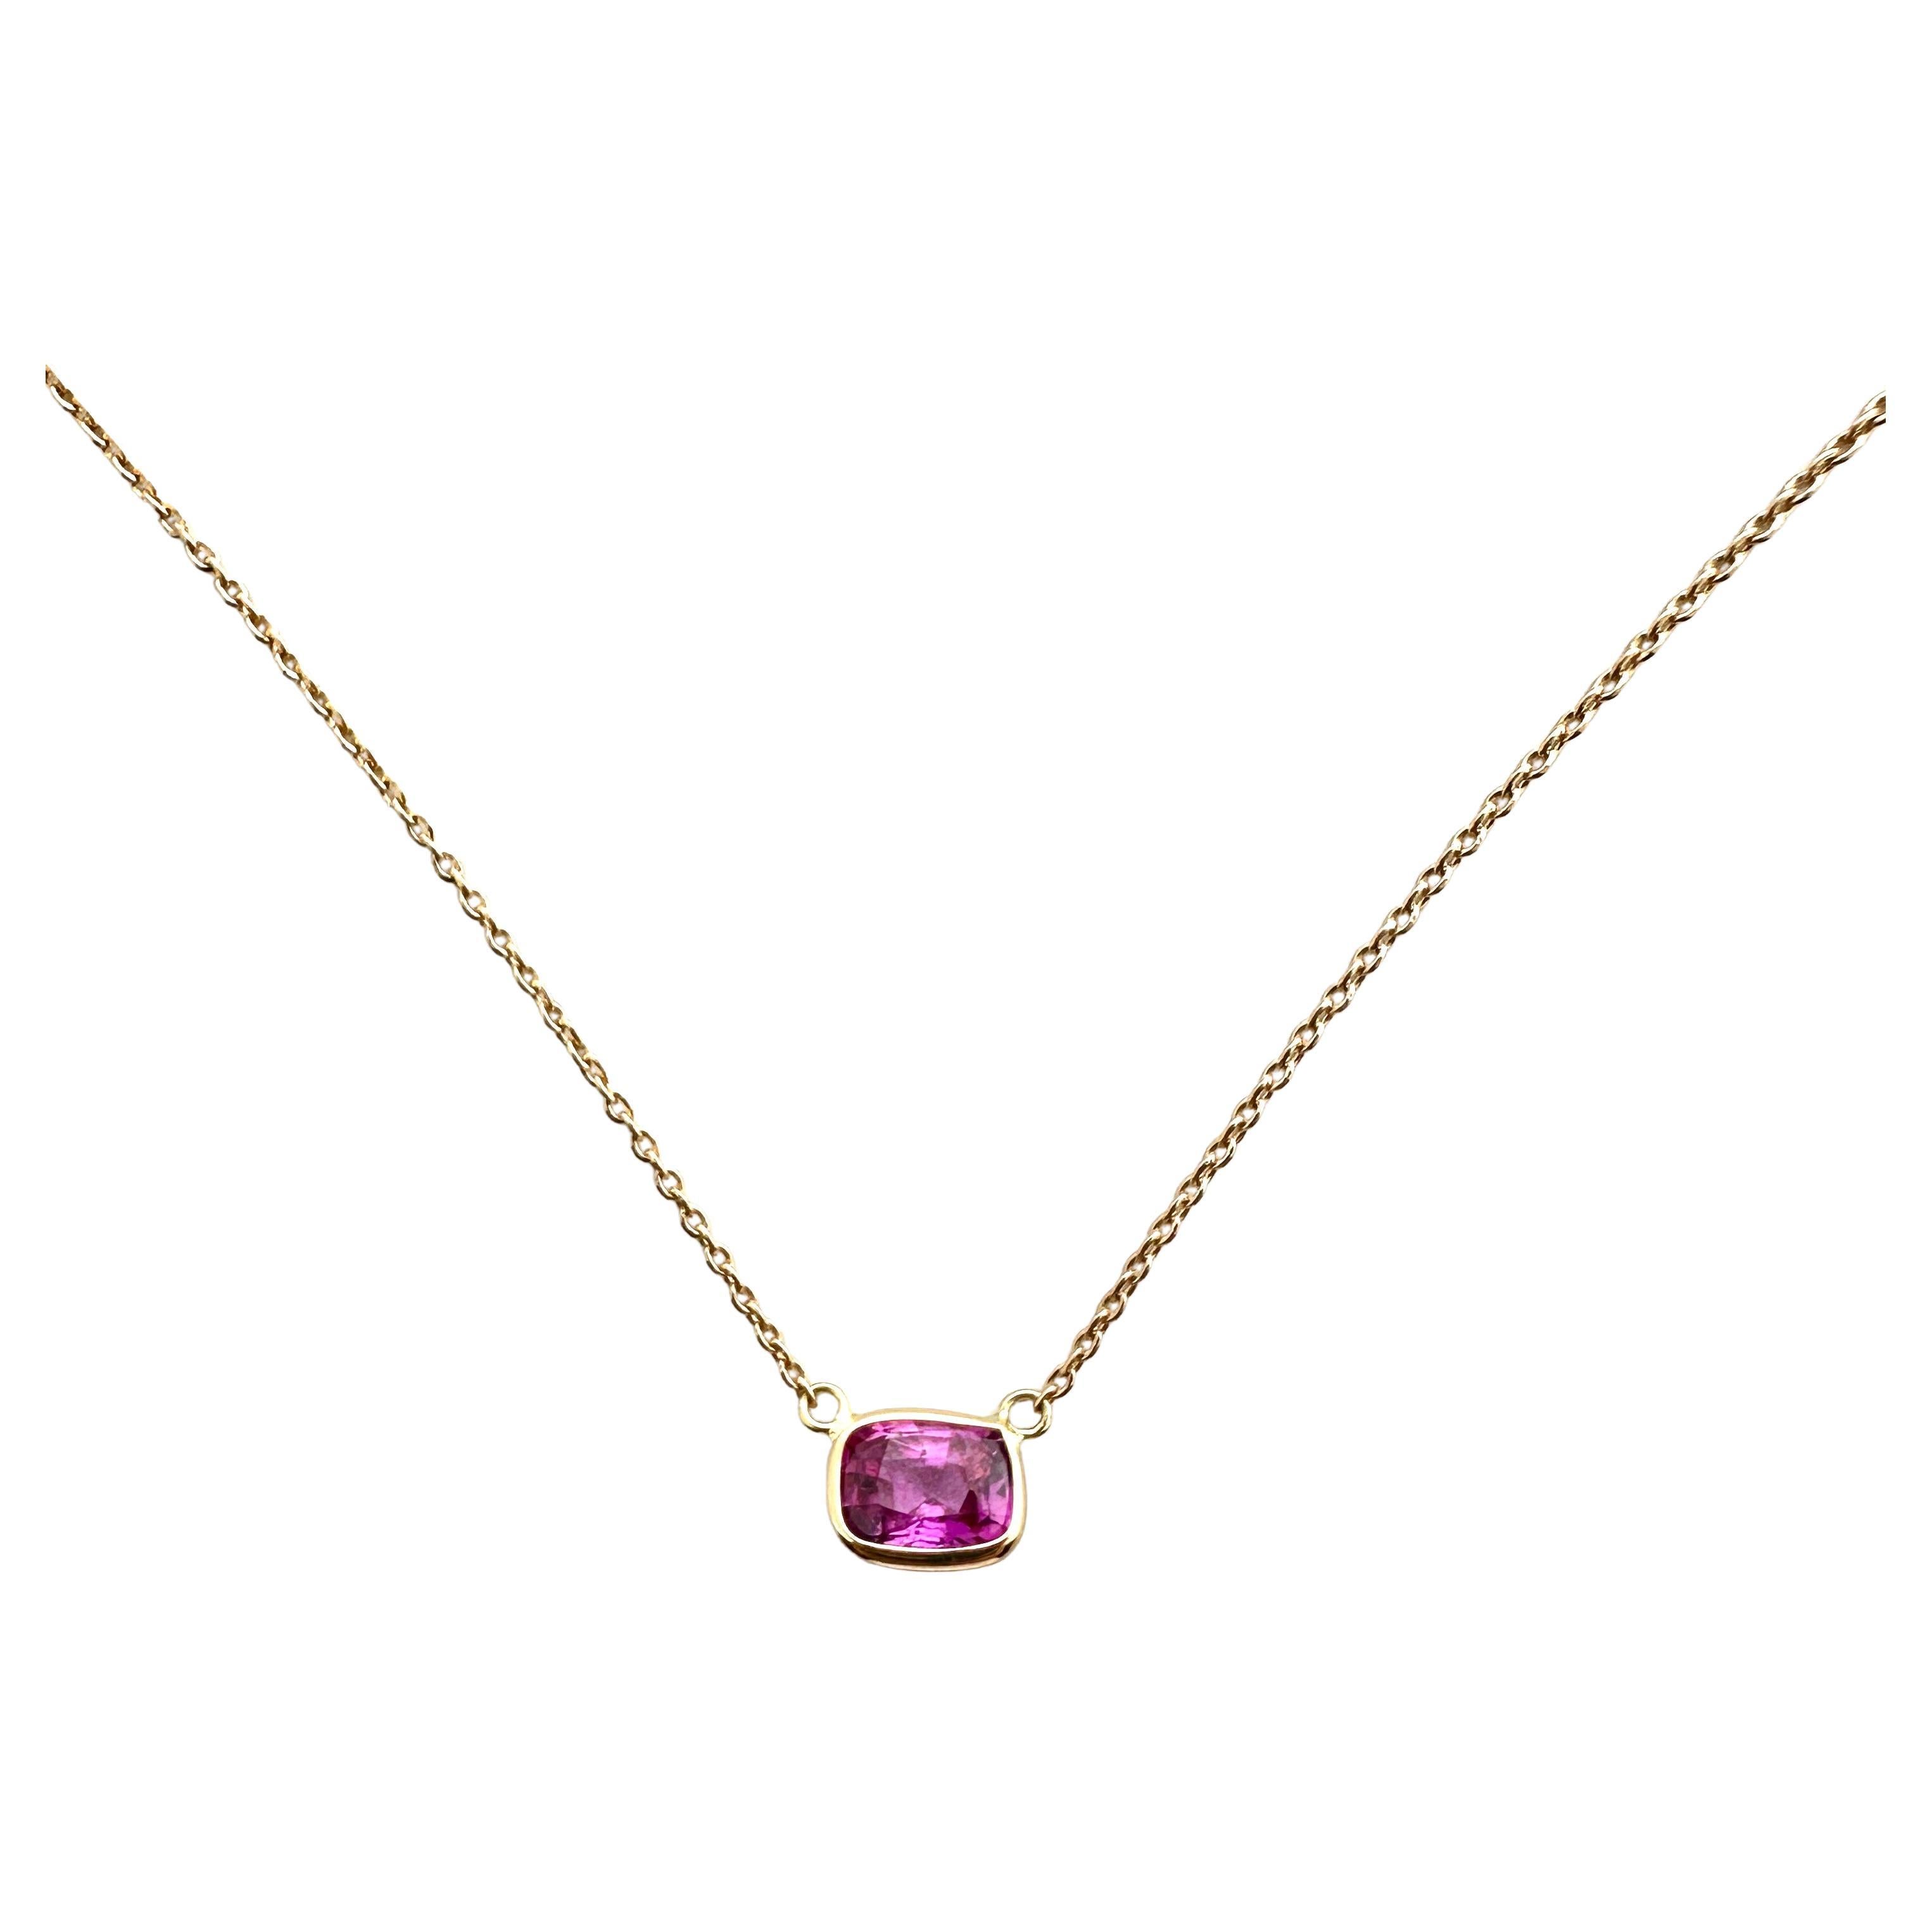 1.03 Carat Sapphire Pink Cushion &Fashion Necklaces Berberyn Certified In 14K RG For Sale